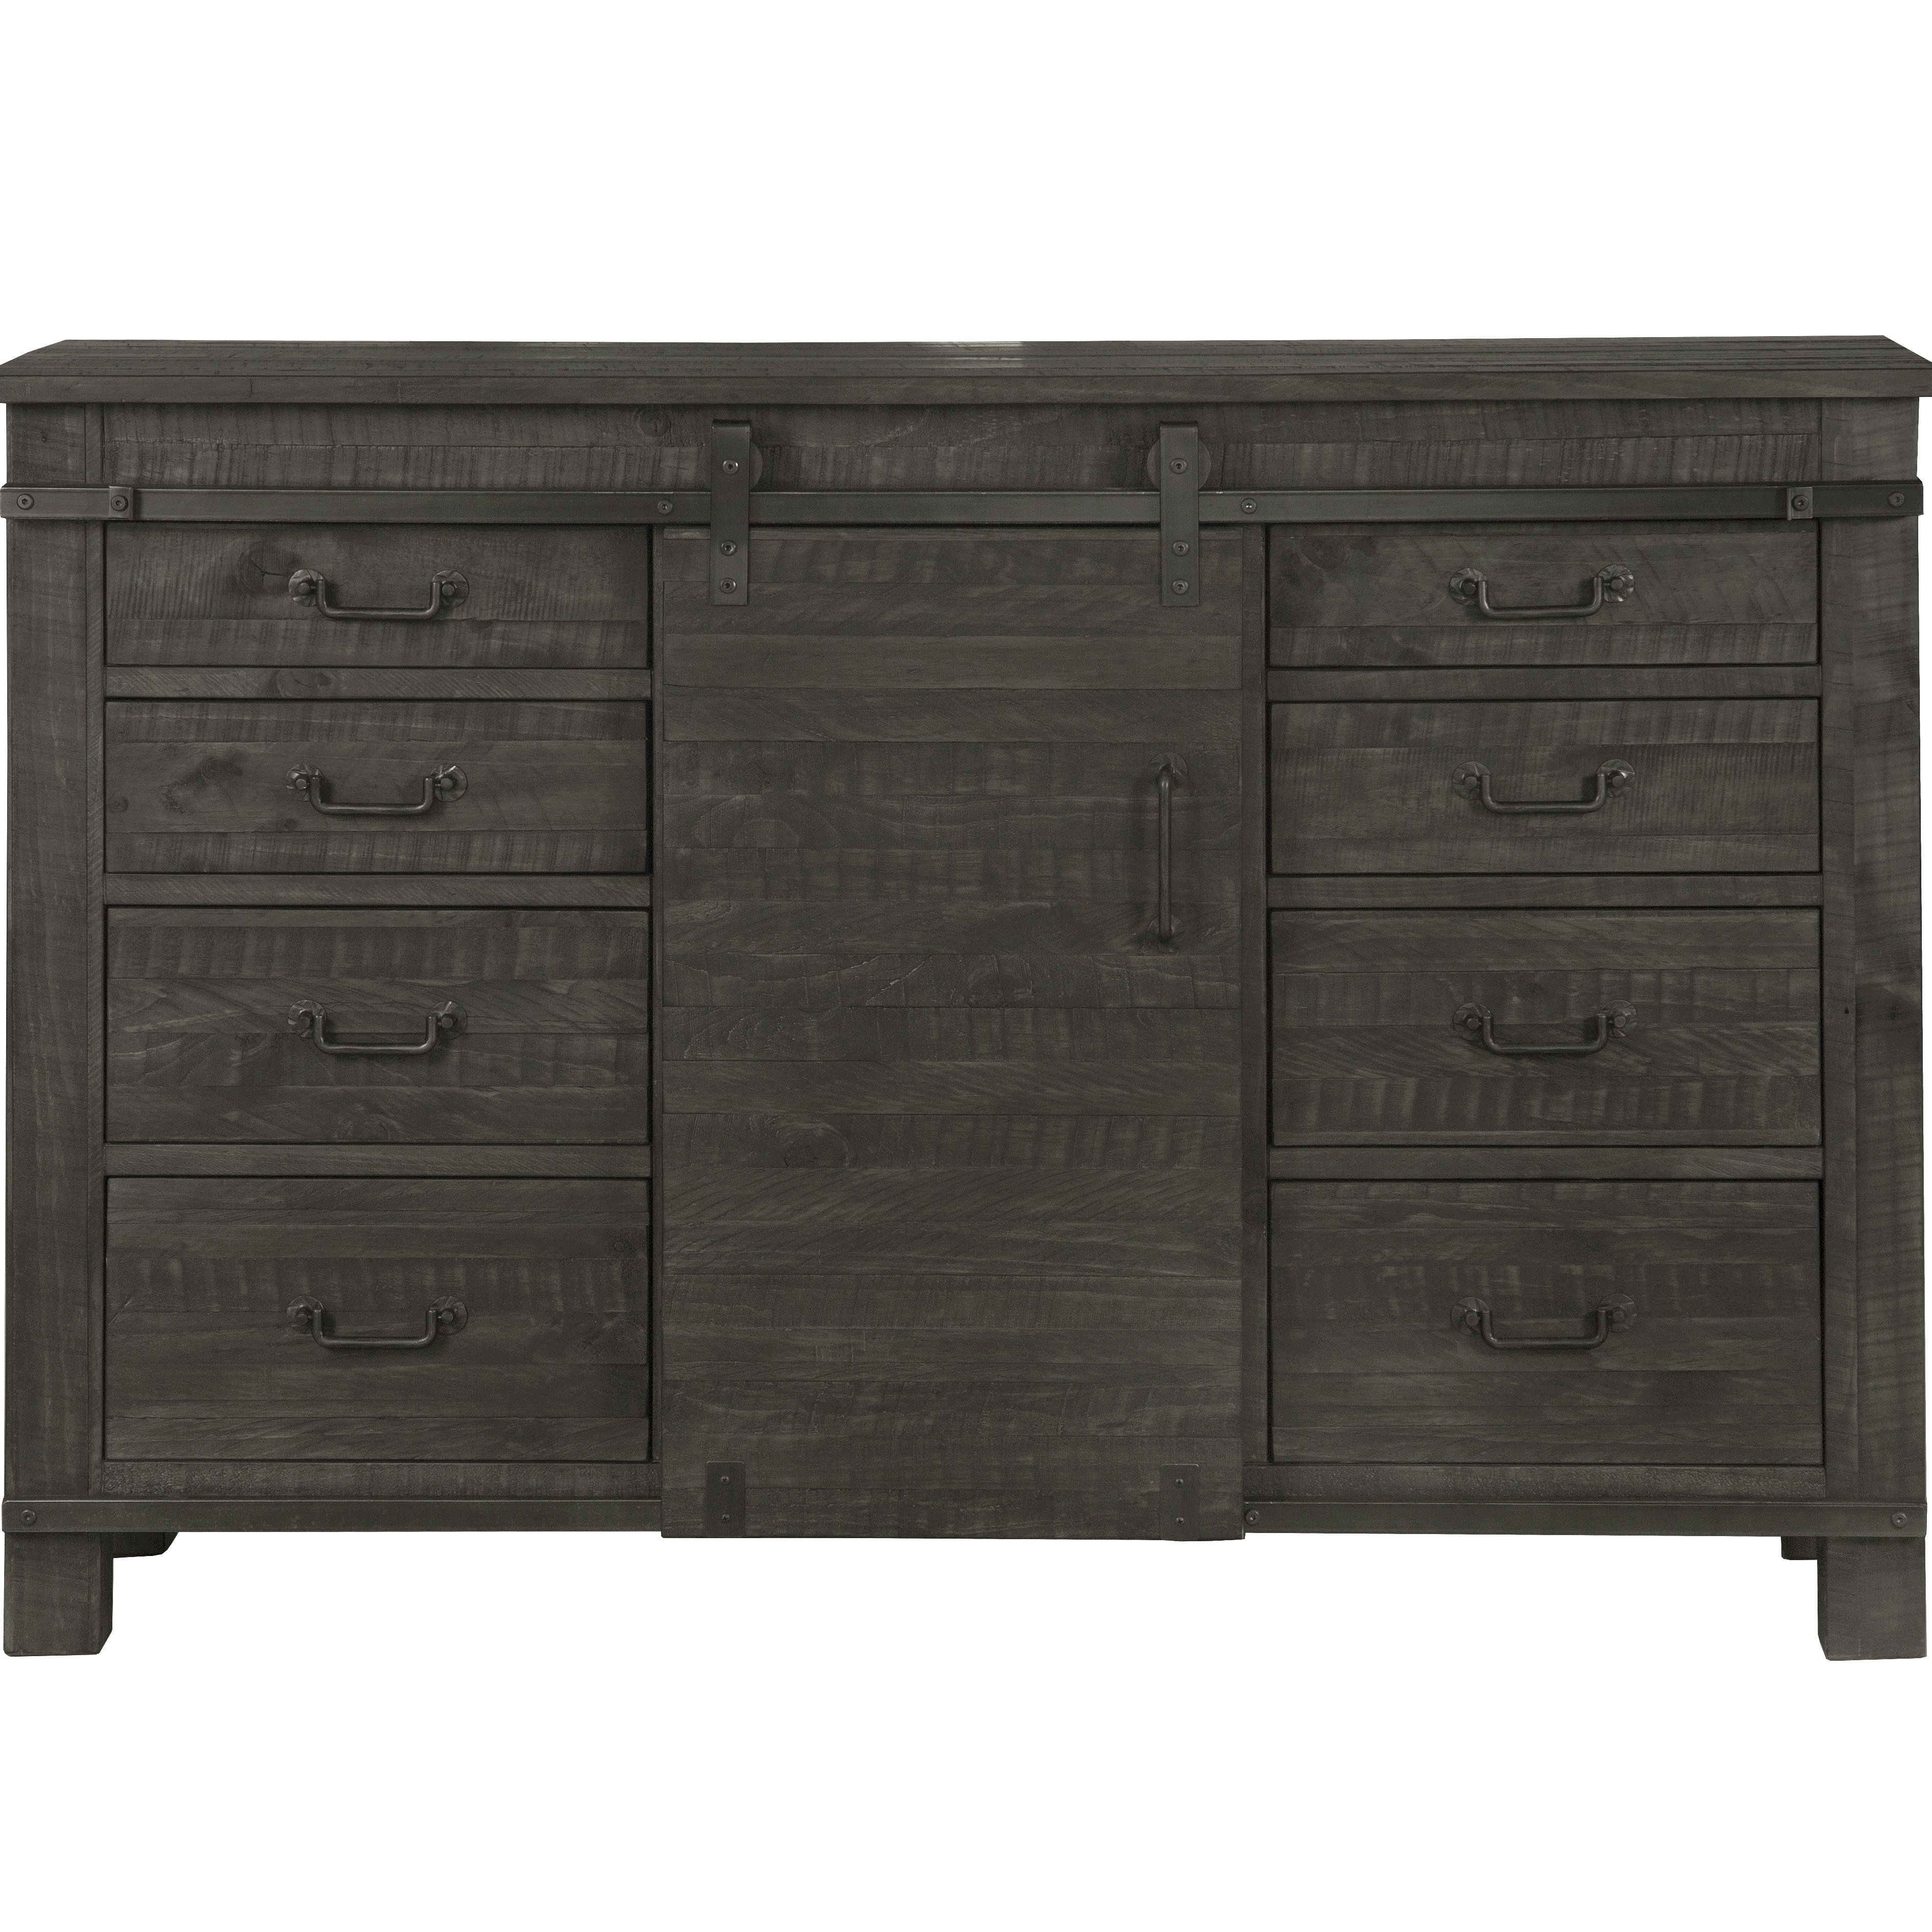 Carston Sideboard Within Most Recently Released Langsa Sideboards (View 11 of 20)